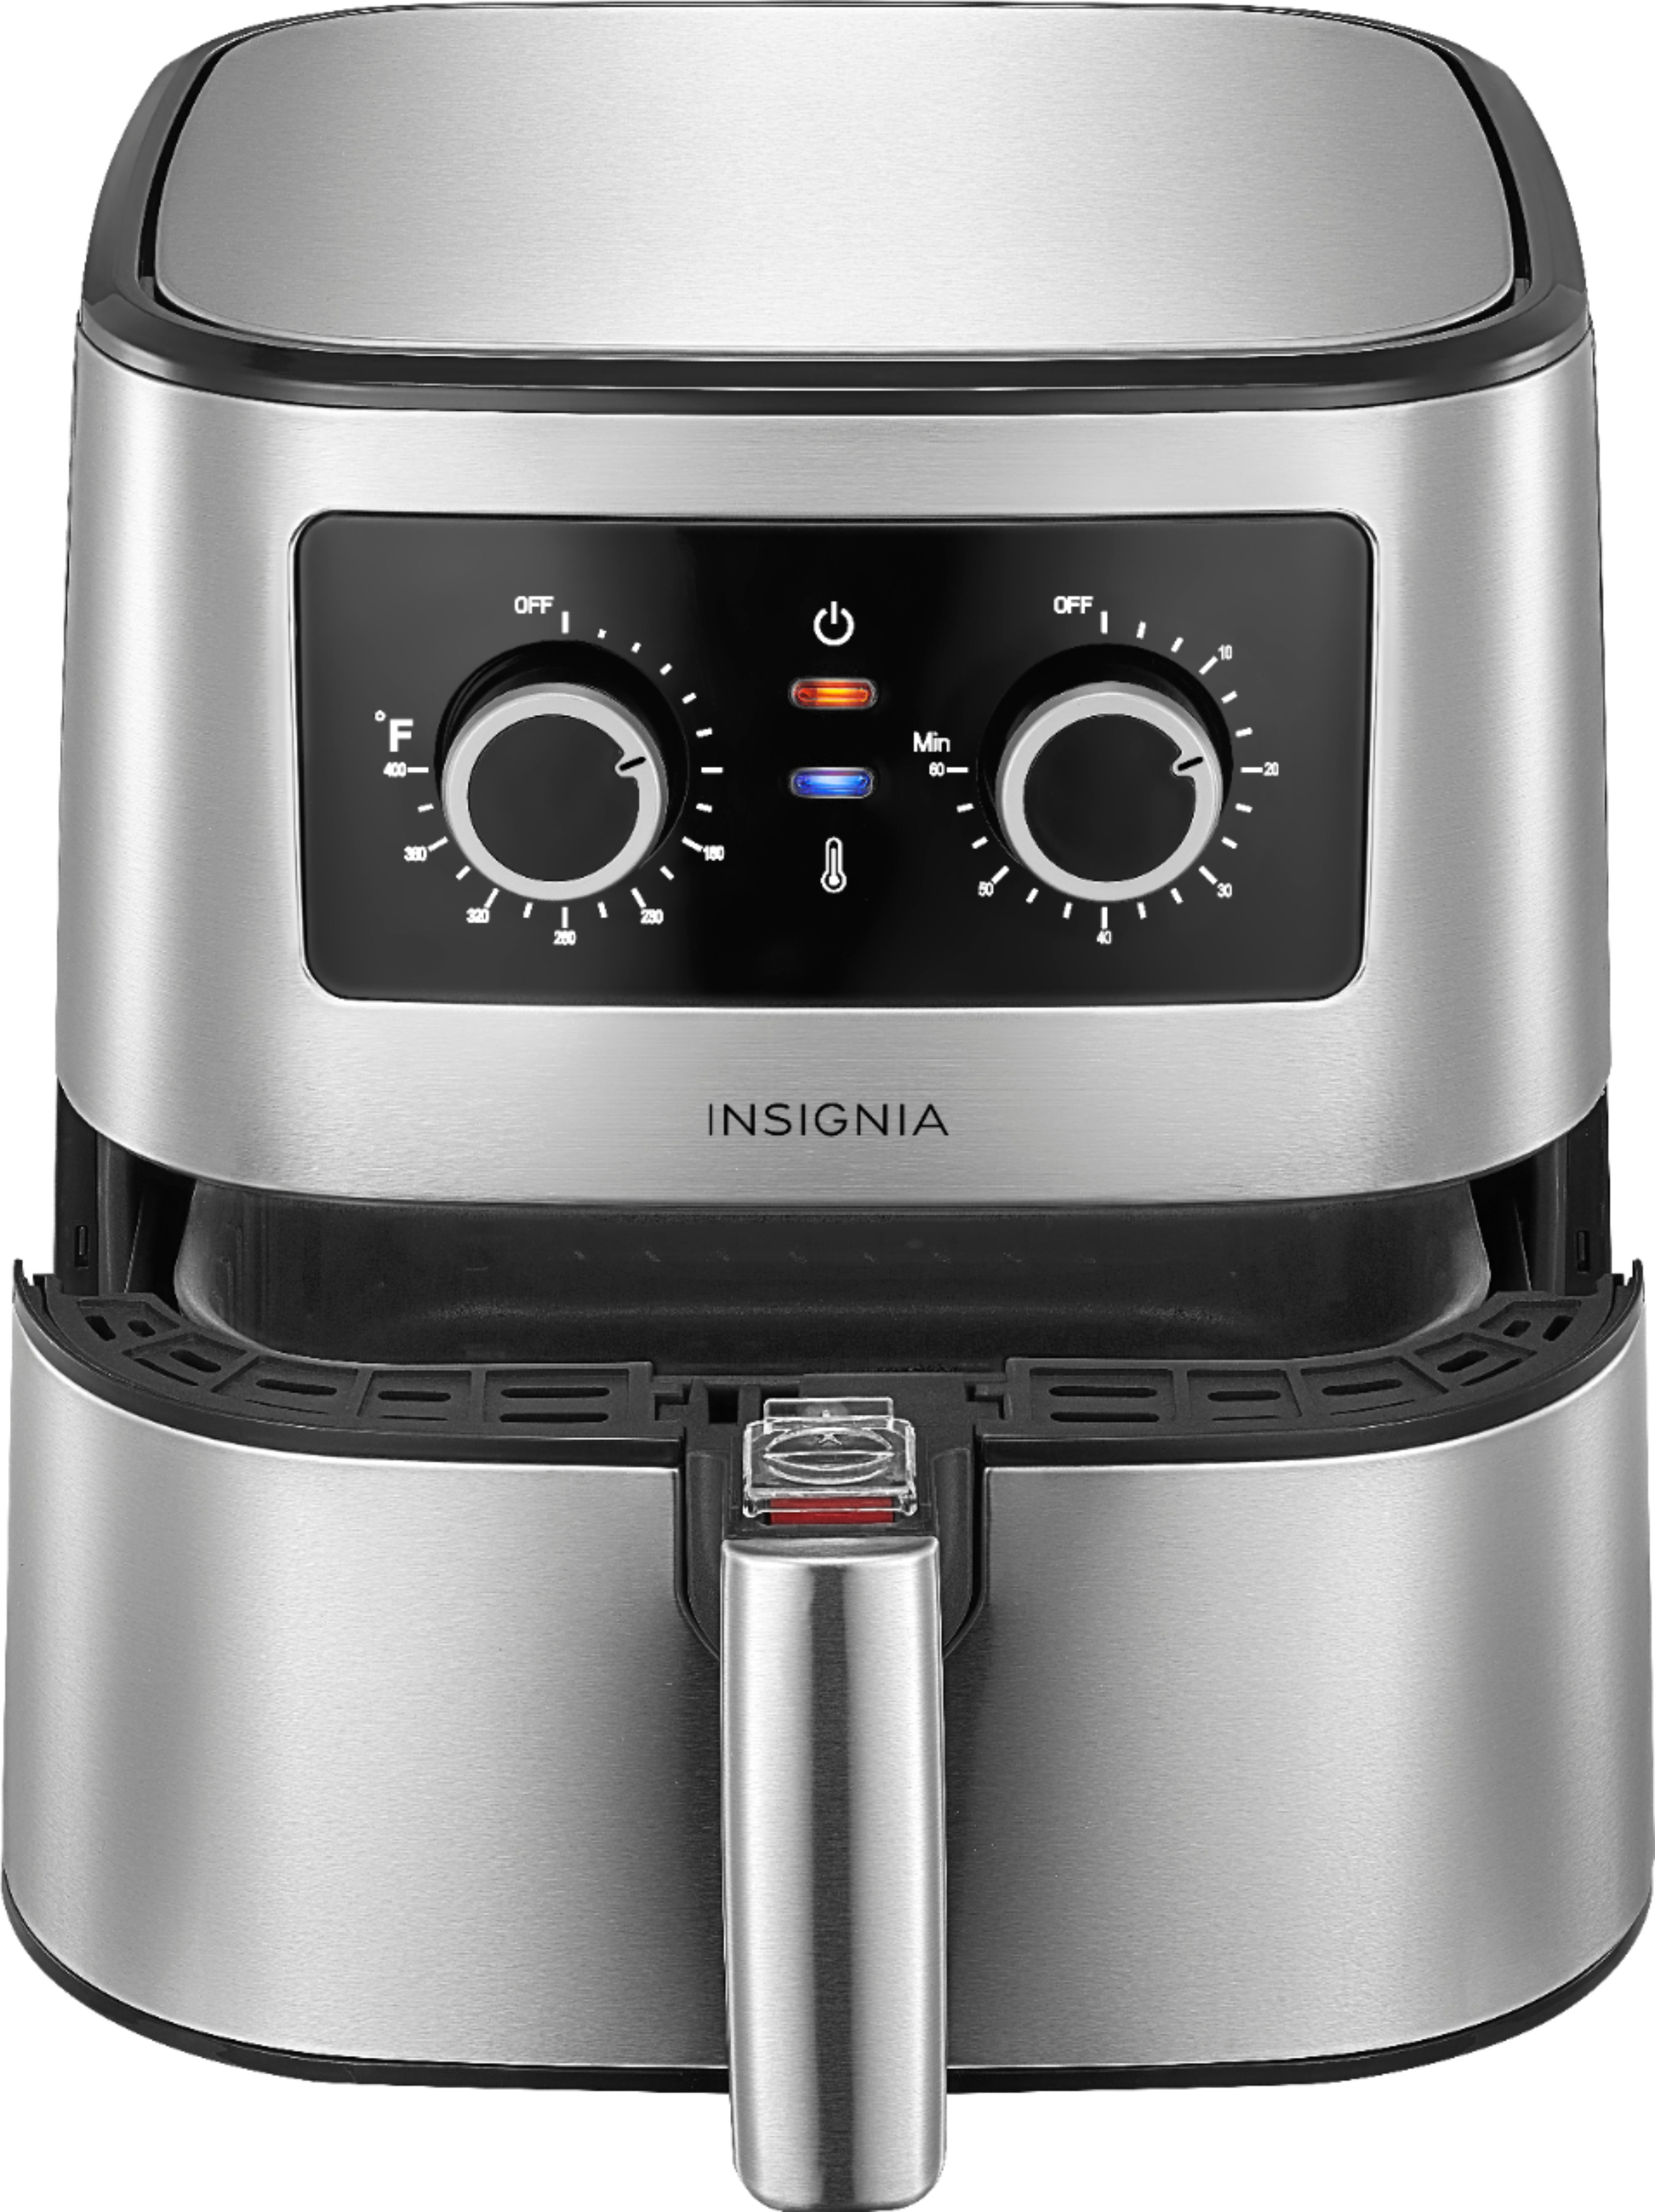 Insignia™ – 5-qt. Analog Air Fryer – Stainless Steel $39.99